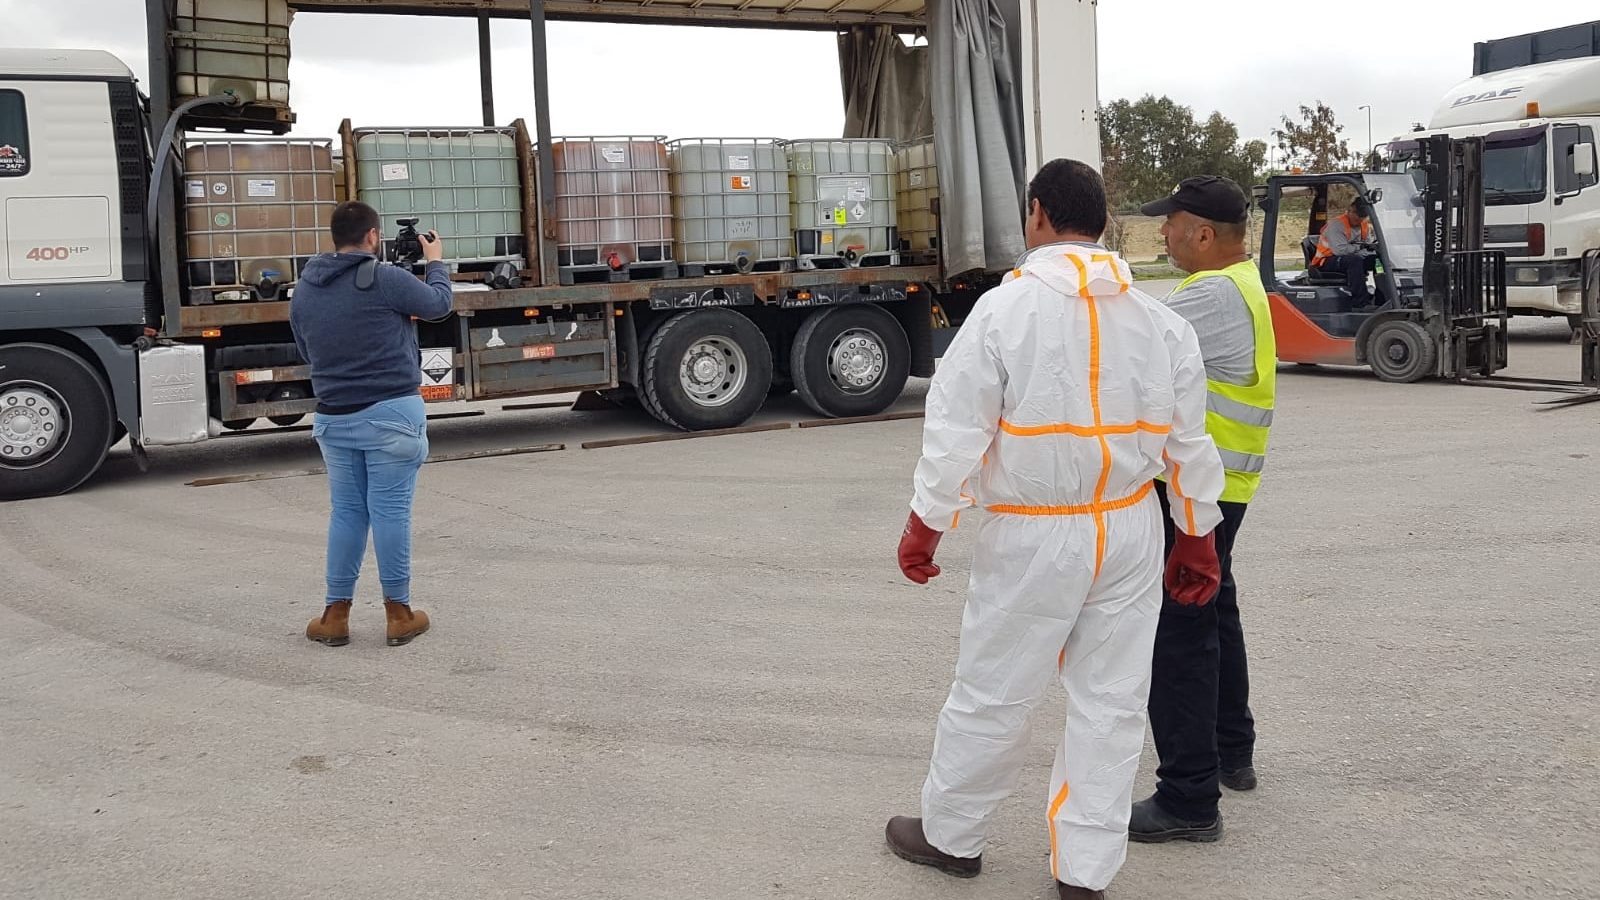 Israel’s COGAT Sends 20 Tons of Disinfectant to Palestinian Territories